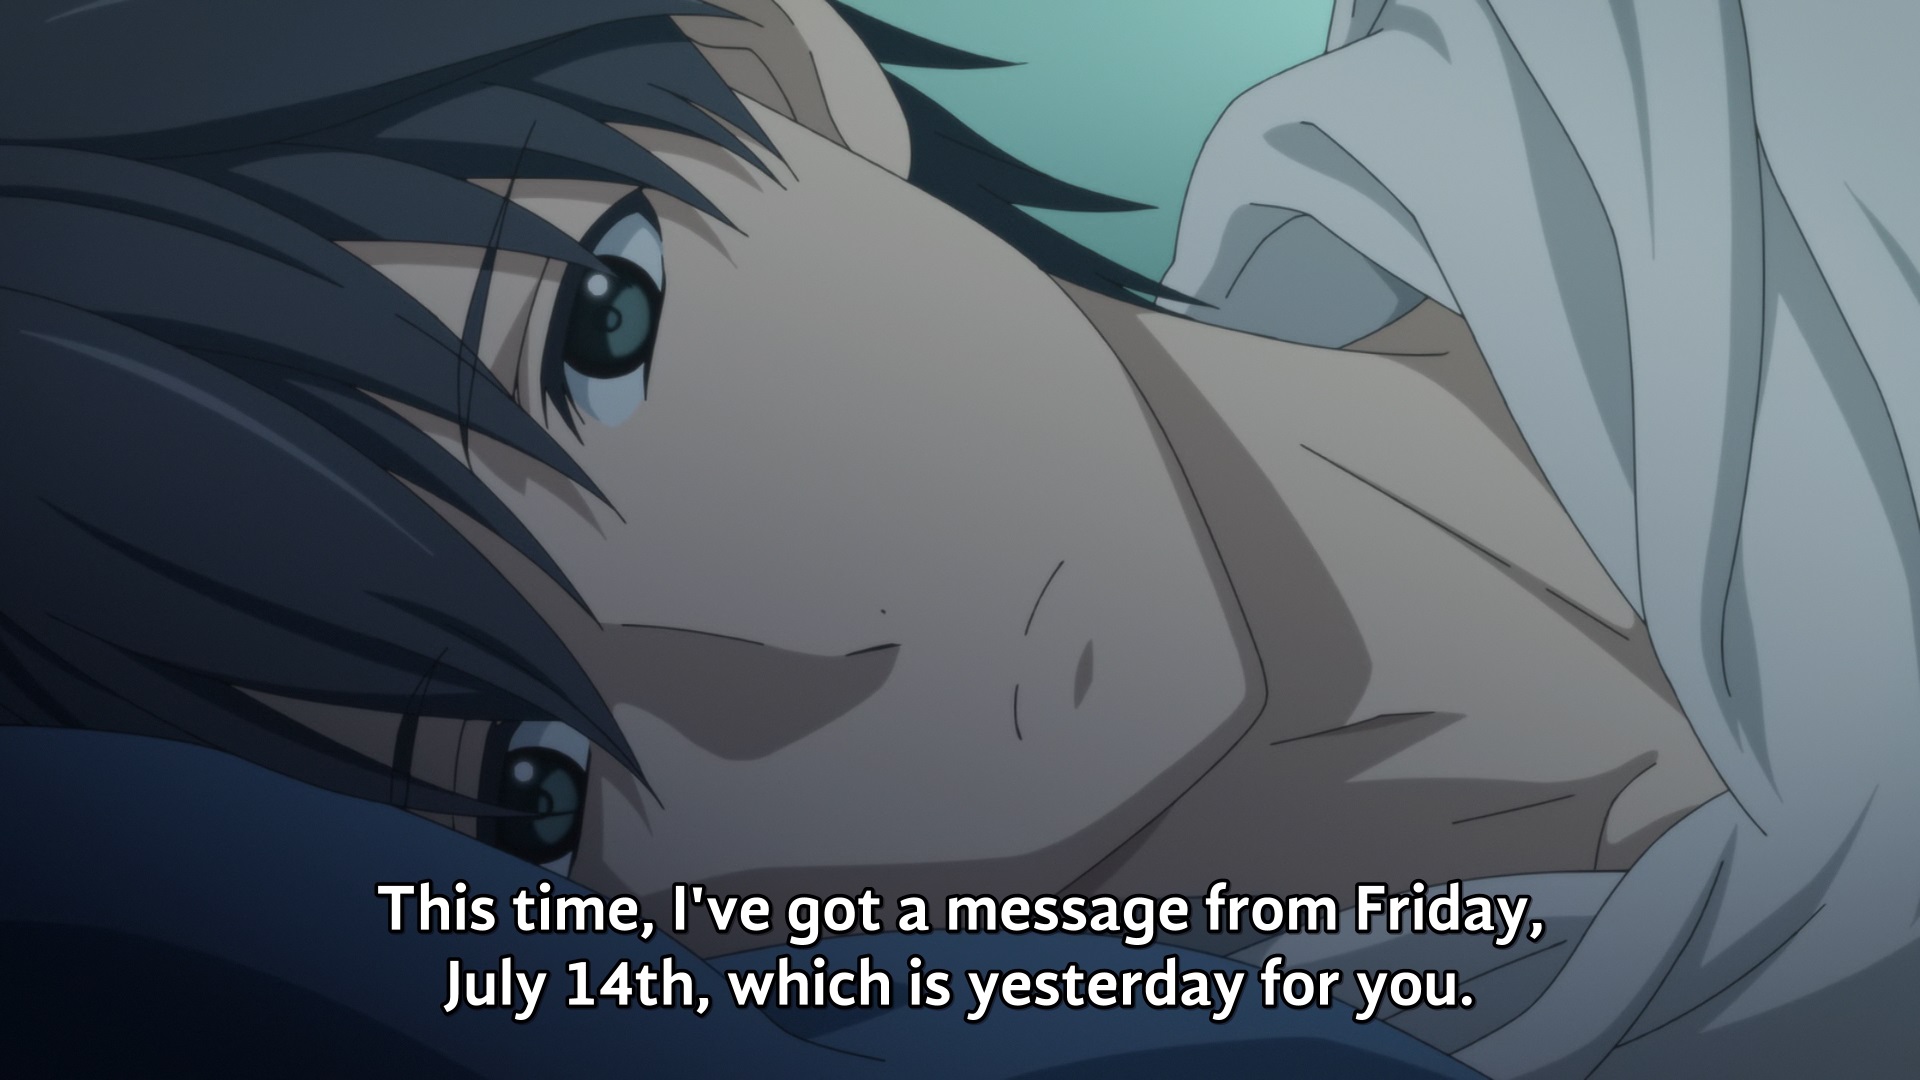 "This time, I've got a message from Friday, July 14th, which is yesterday for you."